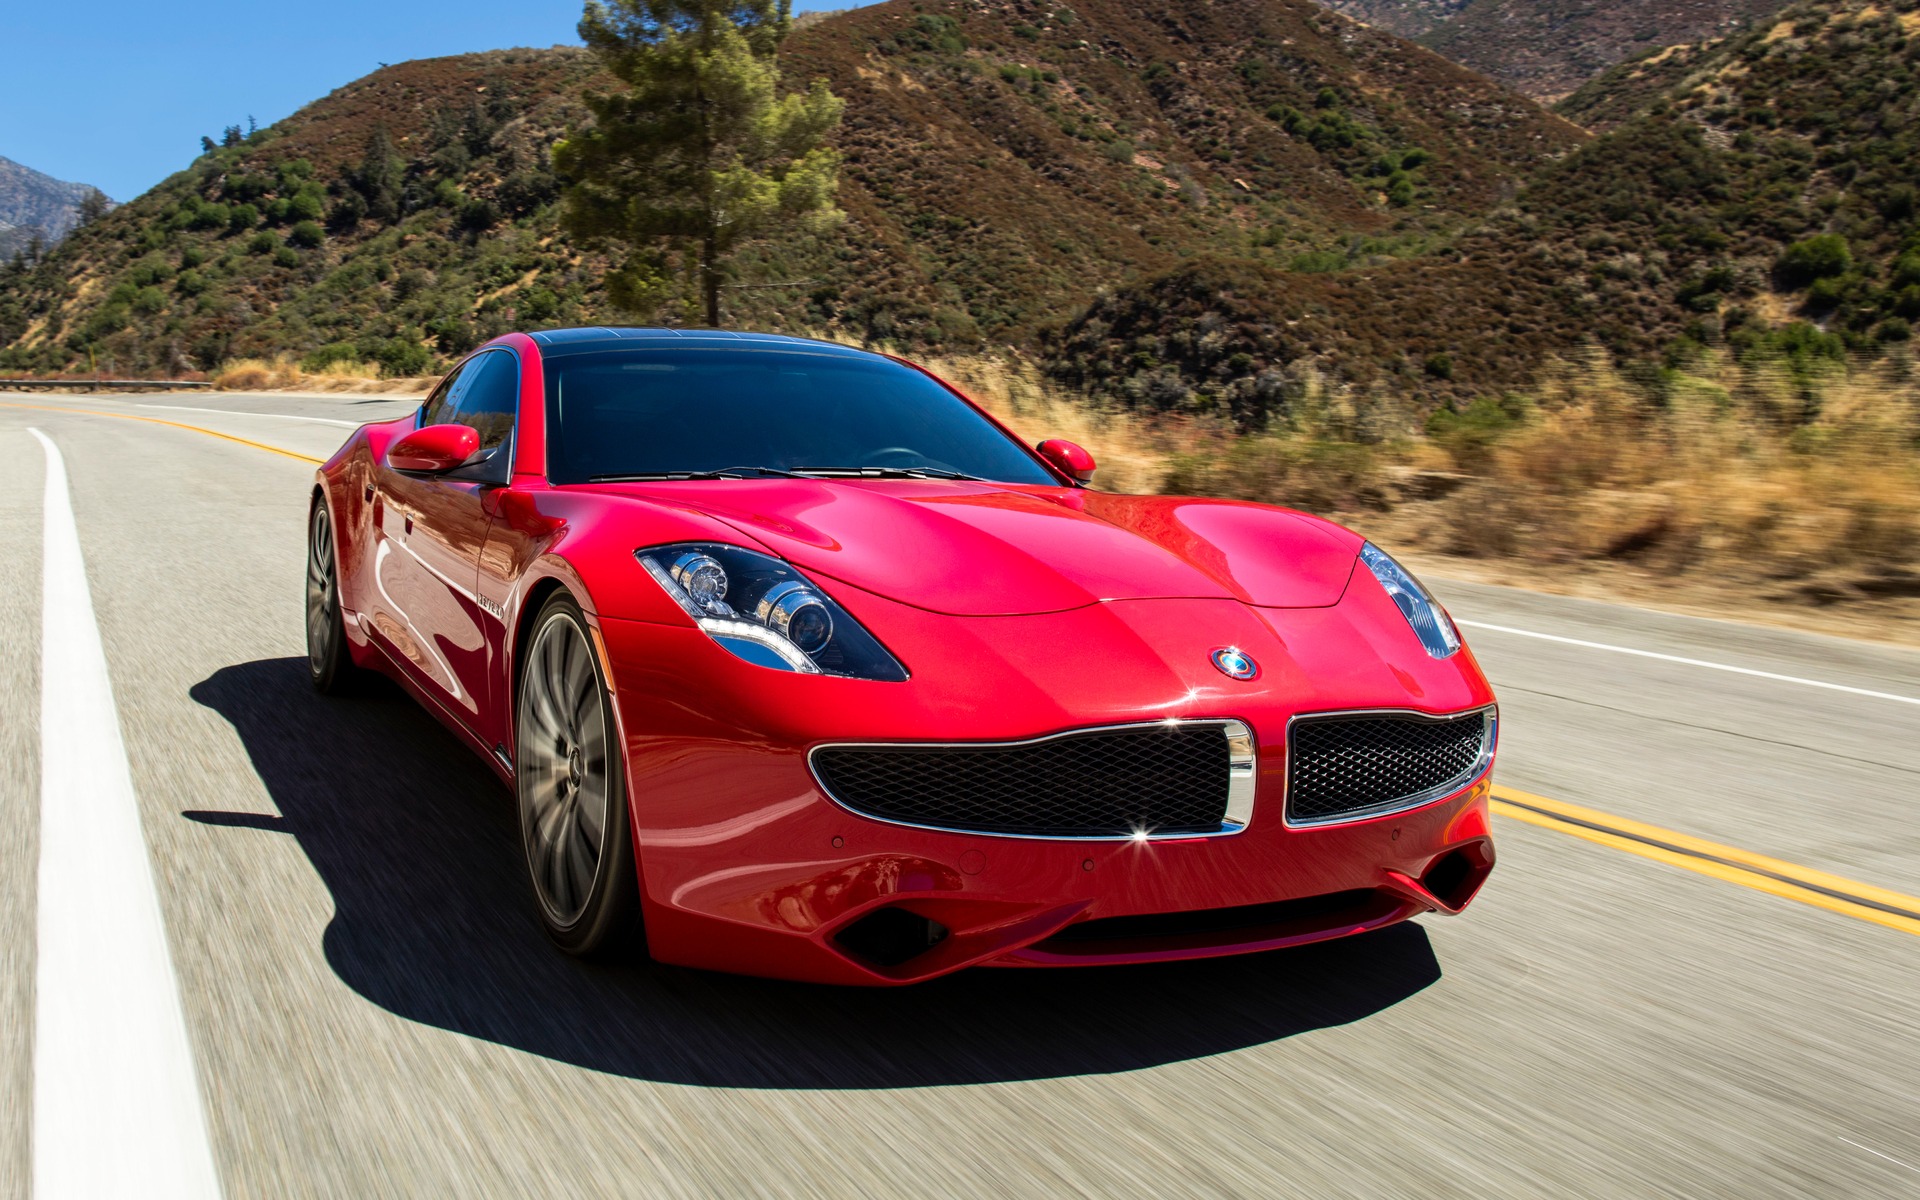 2019 Karma Revero Specifications The Car Guide